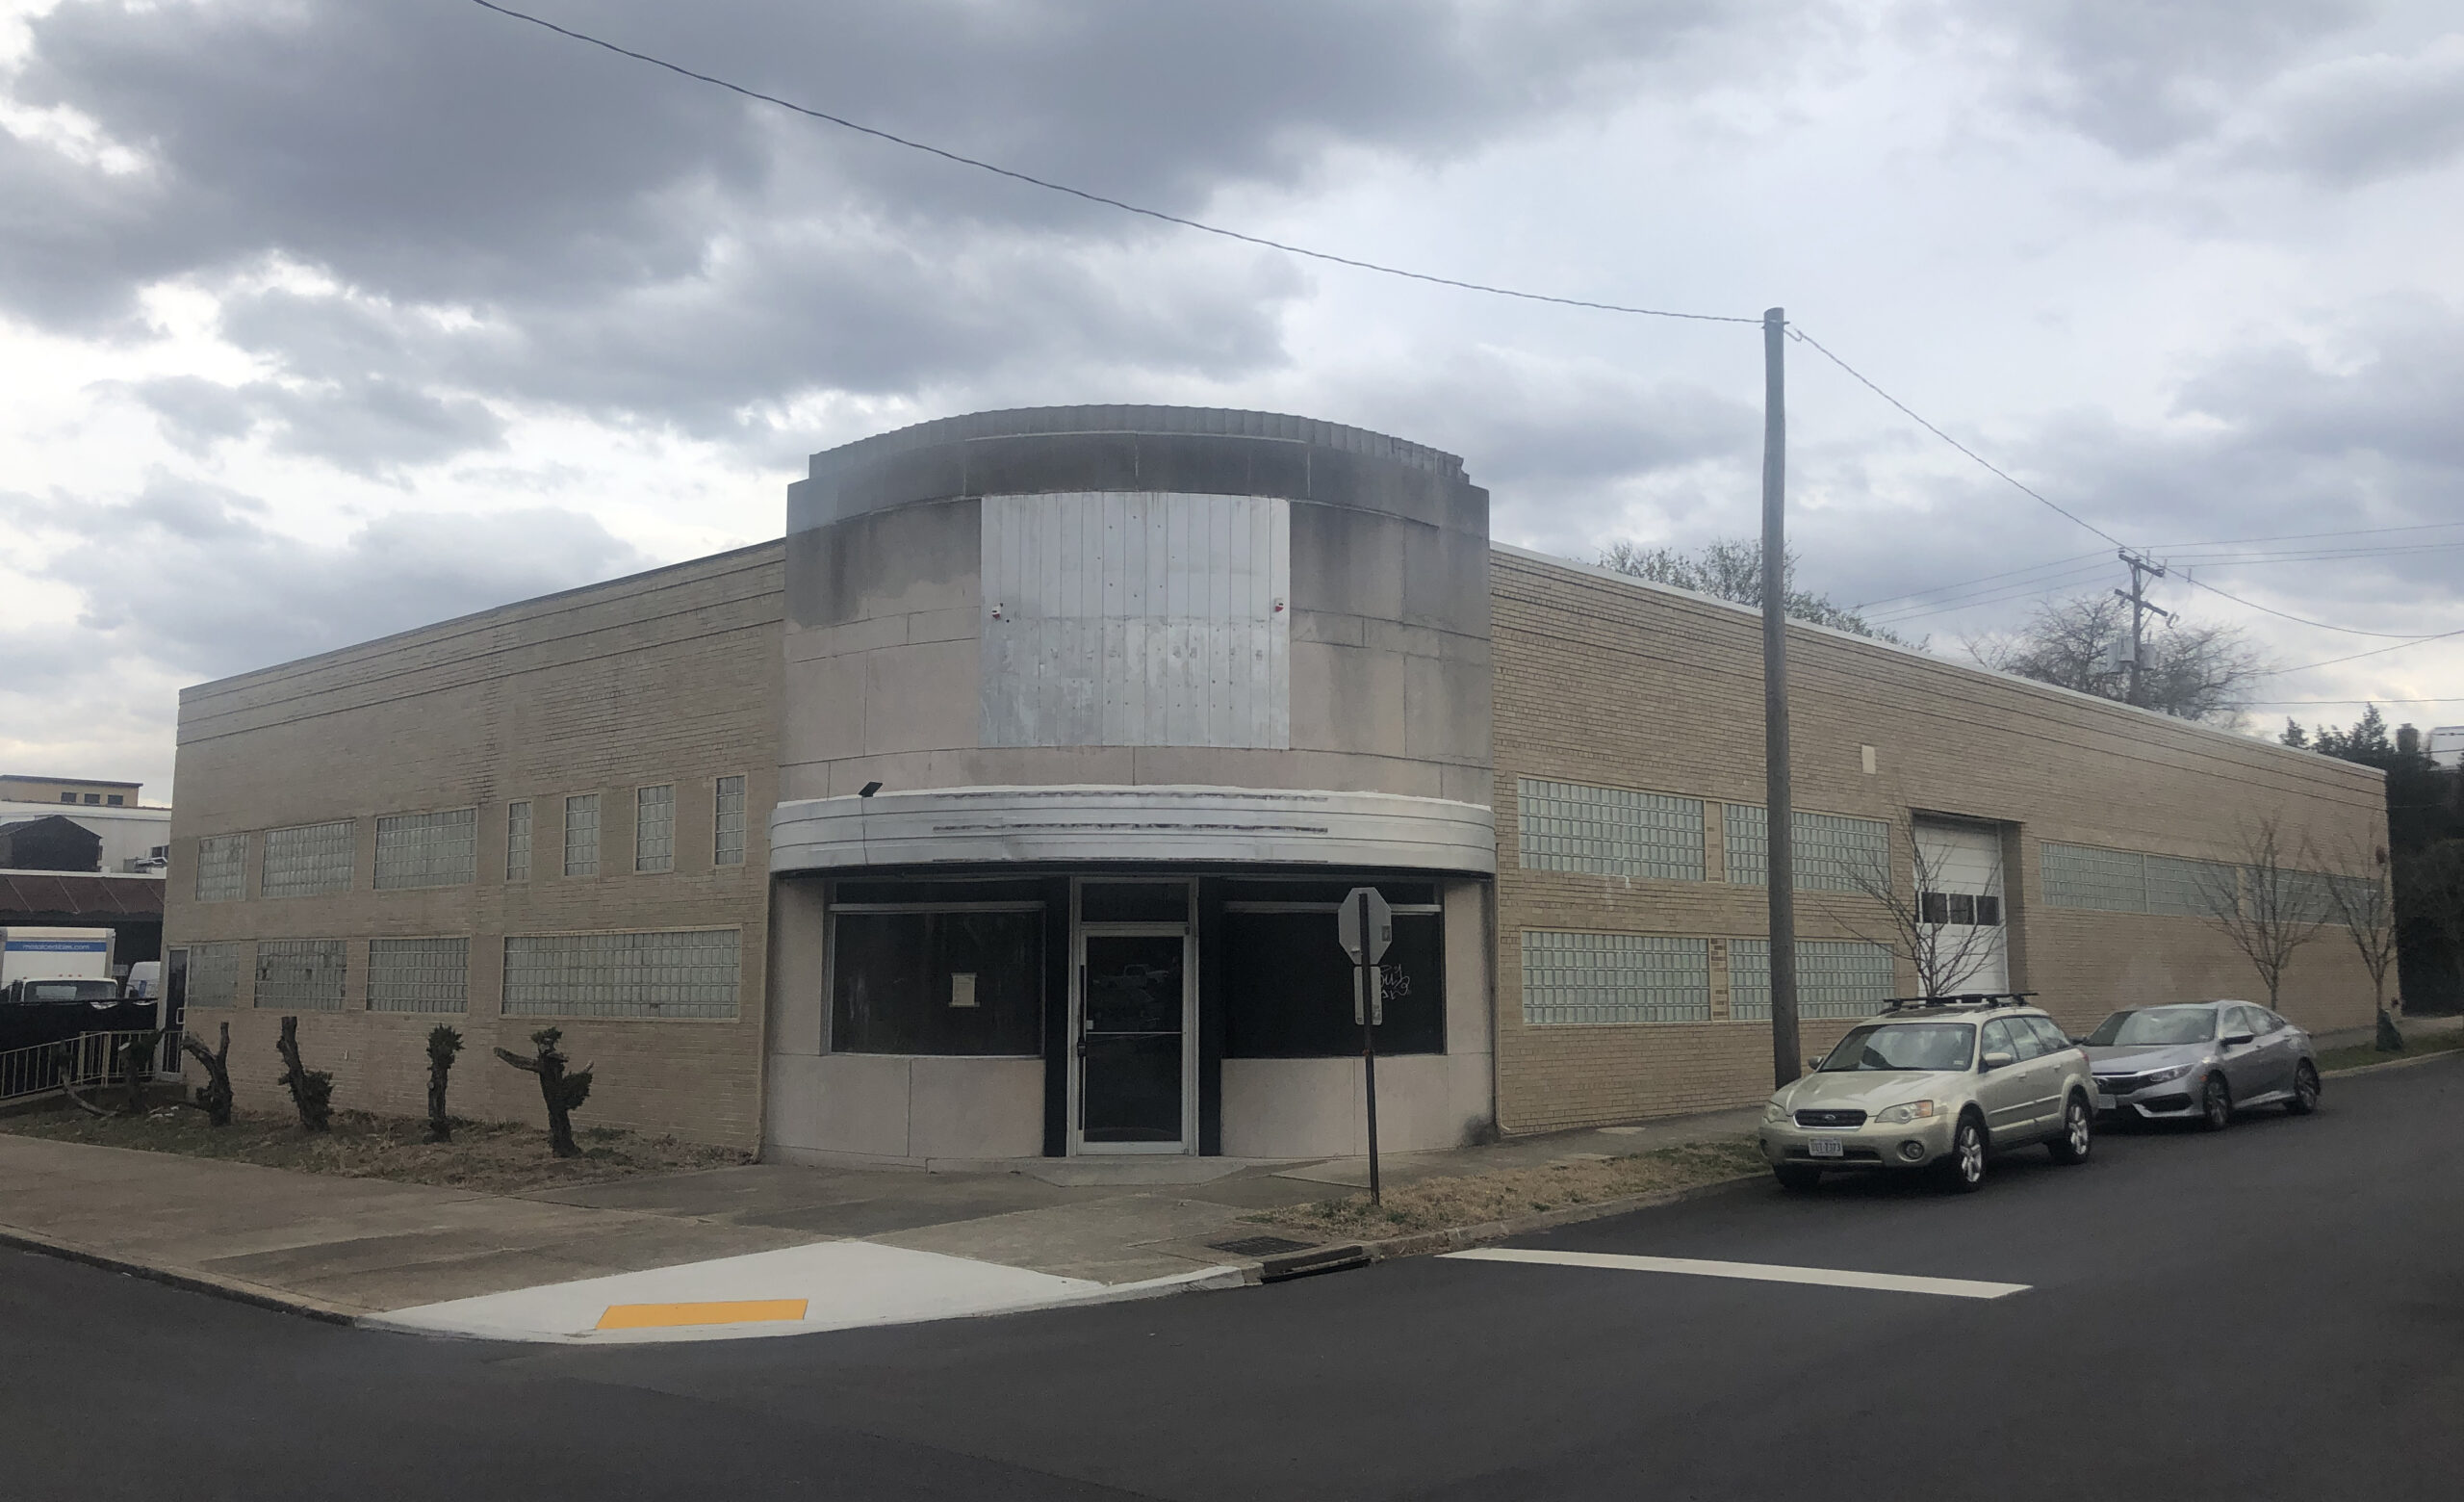 Citing cost, Mosaic abandons plan for events space near Scott’s Addition - Richmond BizSense